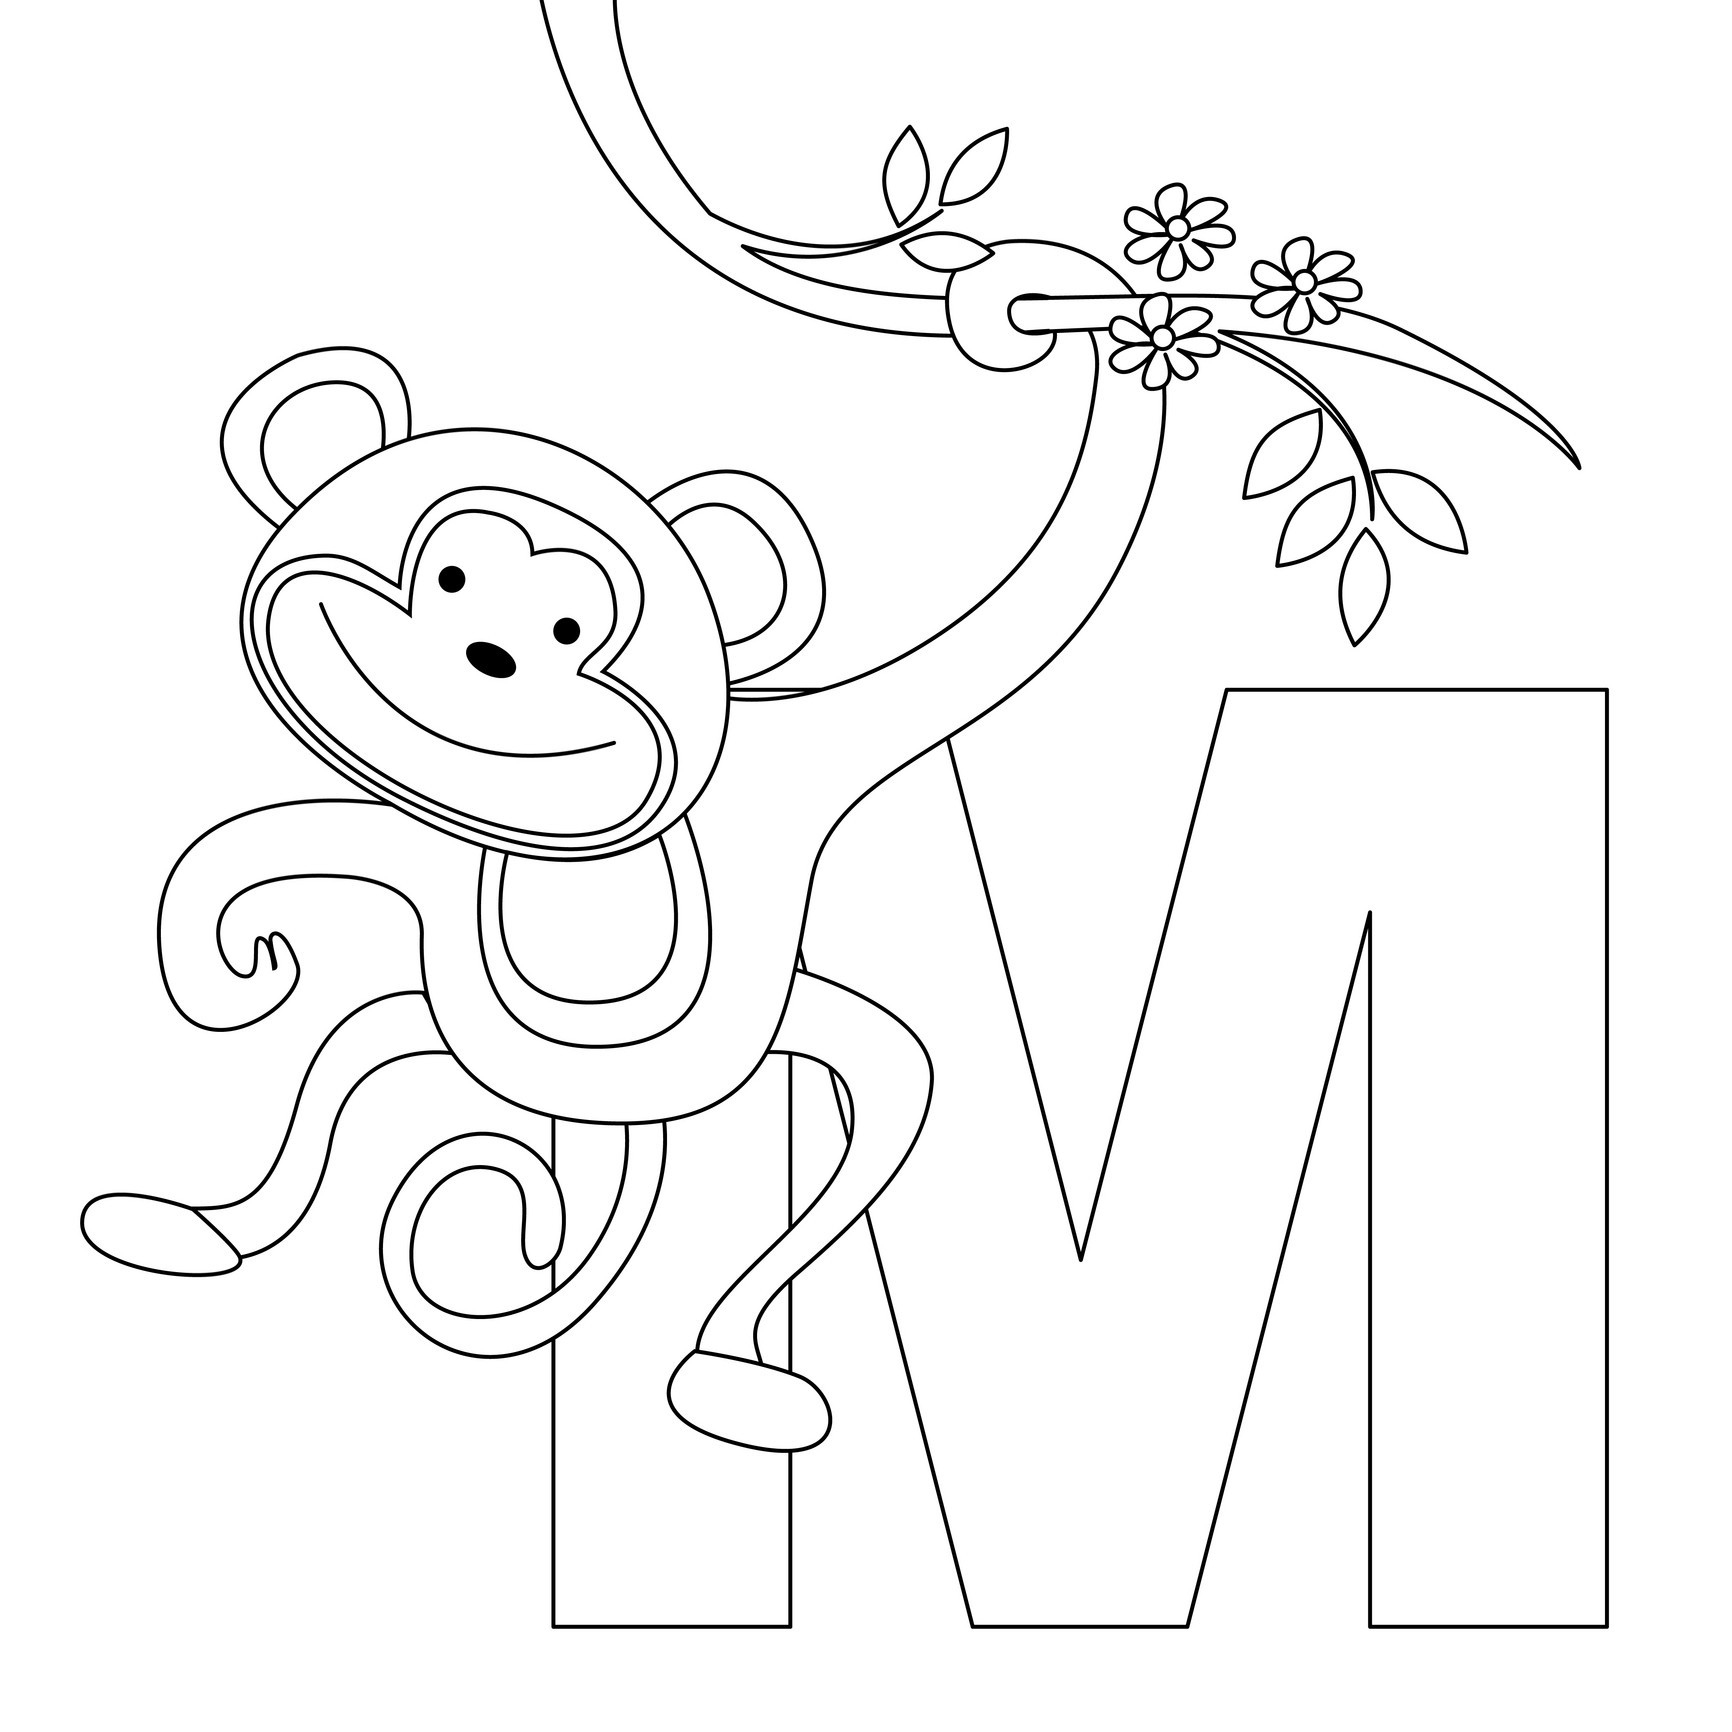 free-printable-alphabet-coloring-pages-alphabet-coloring-pages-alphabet-letter-free-printable